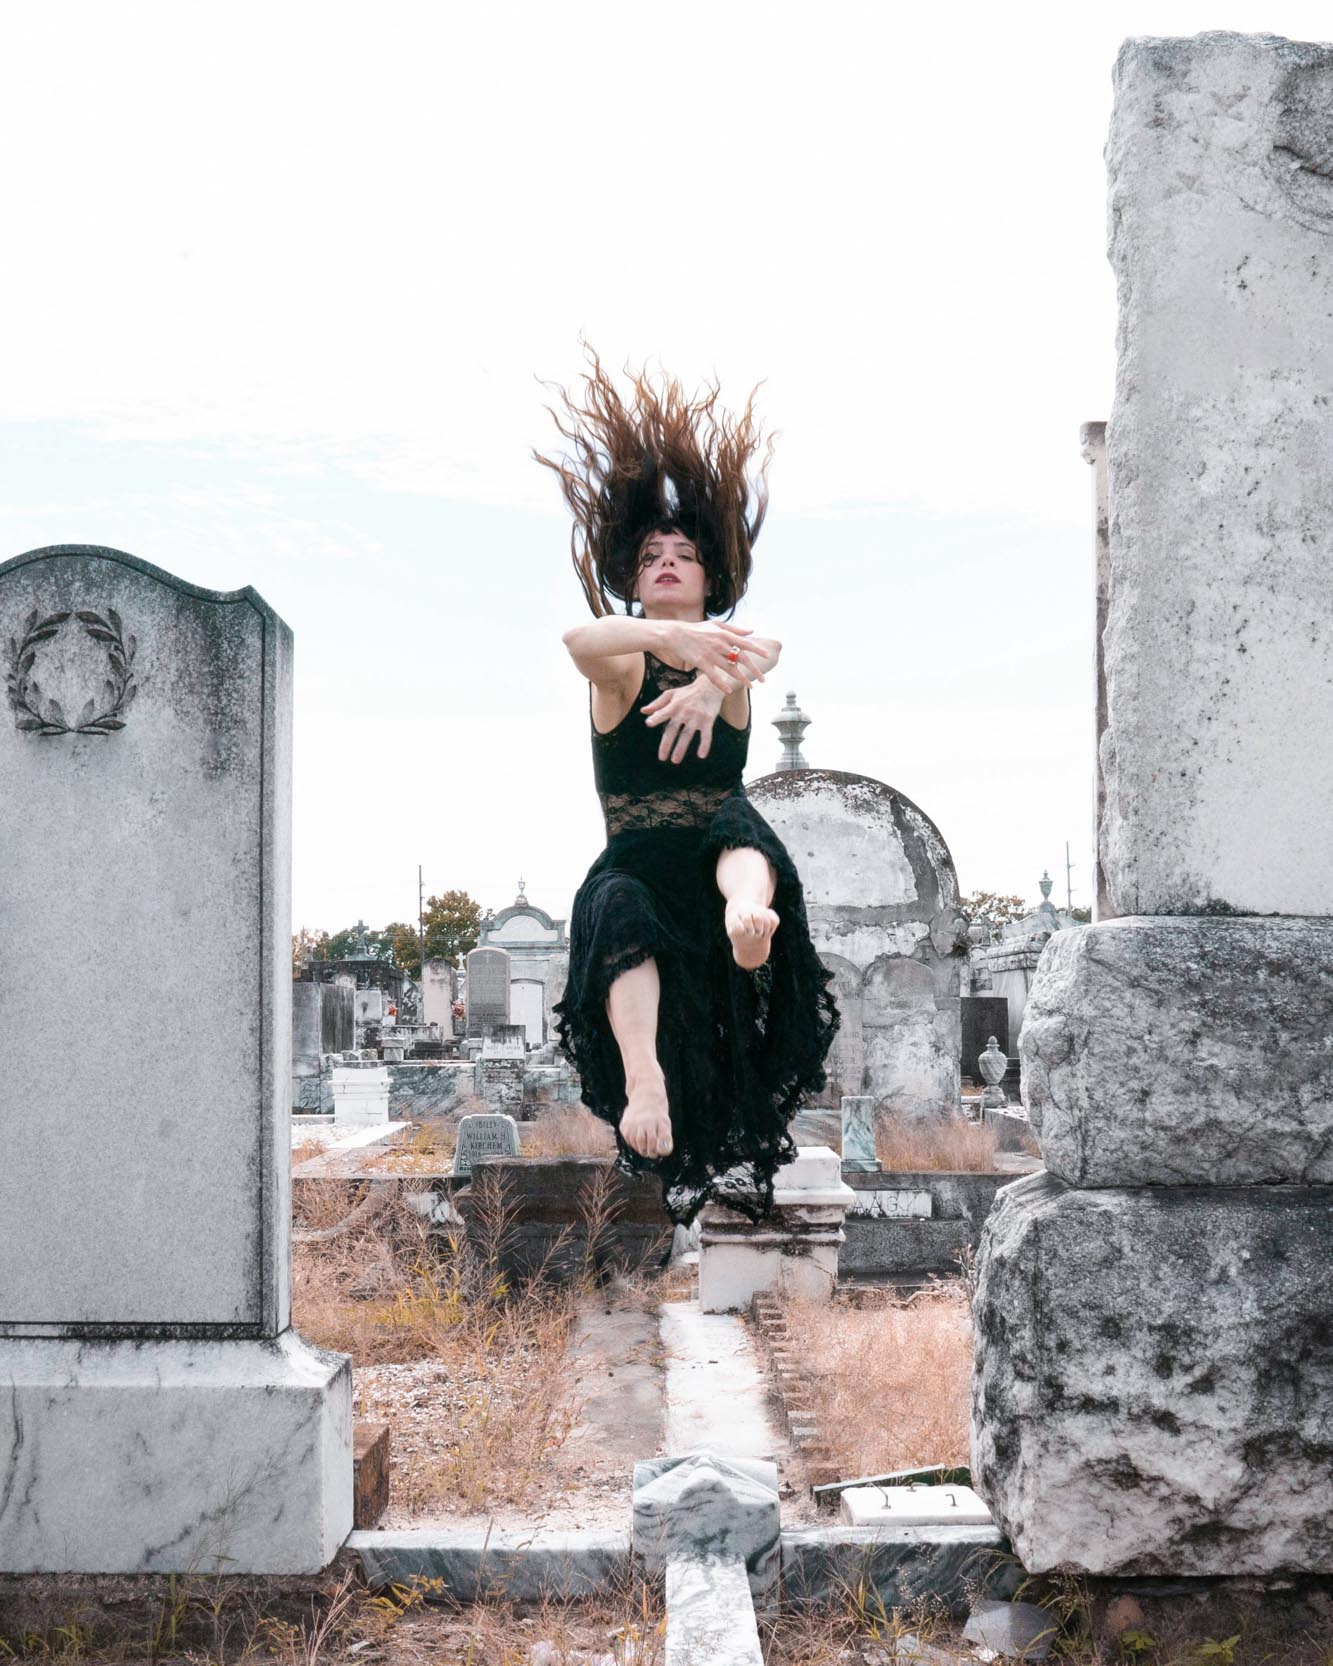 Woman performing epic dance in New Orleans cemetery with her hair flipped back